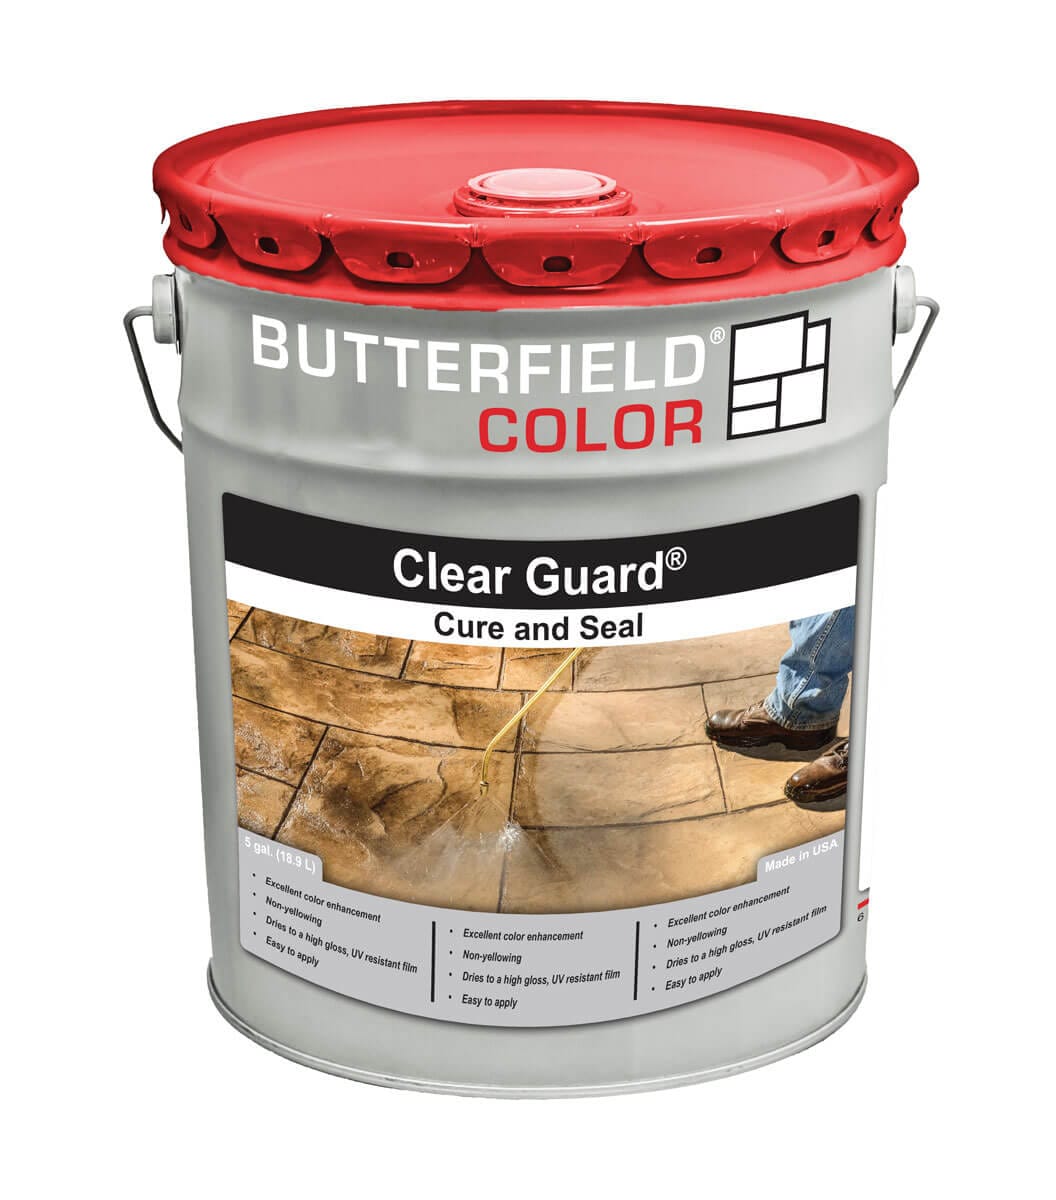 Butterfield Color Clear Guard First Seal - Xtreme Polishing Systems: concrete sealers, concrete floor sealers, and floor sealers.